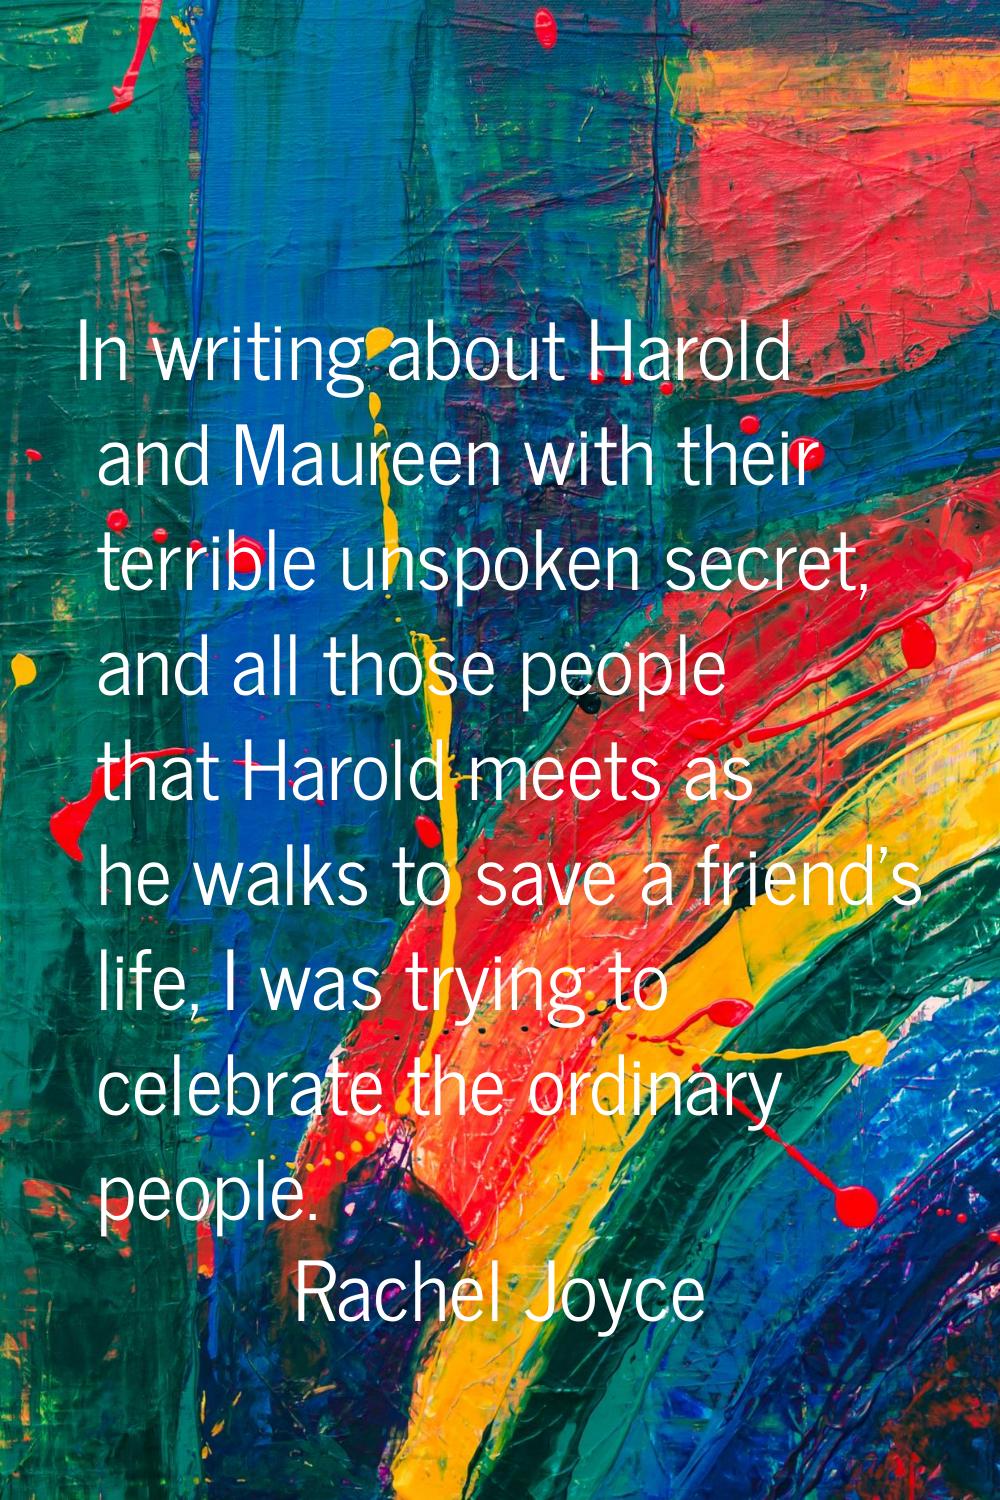 In writing about Harold and Maureen with their terrible unspoken secret, and all those people that 